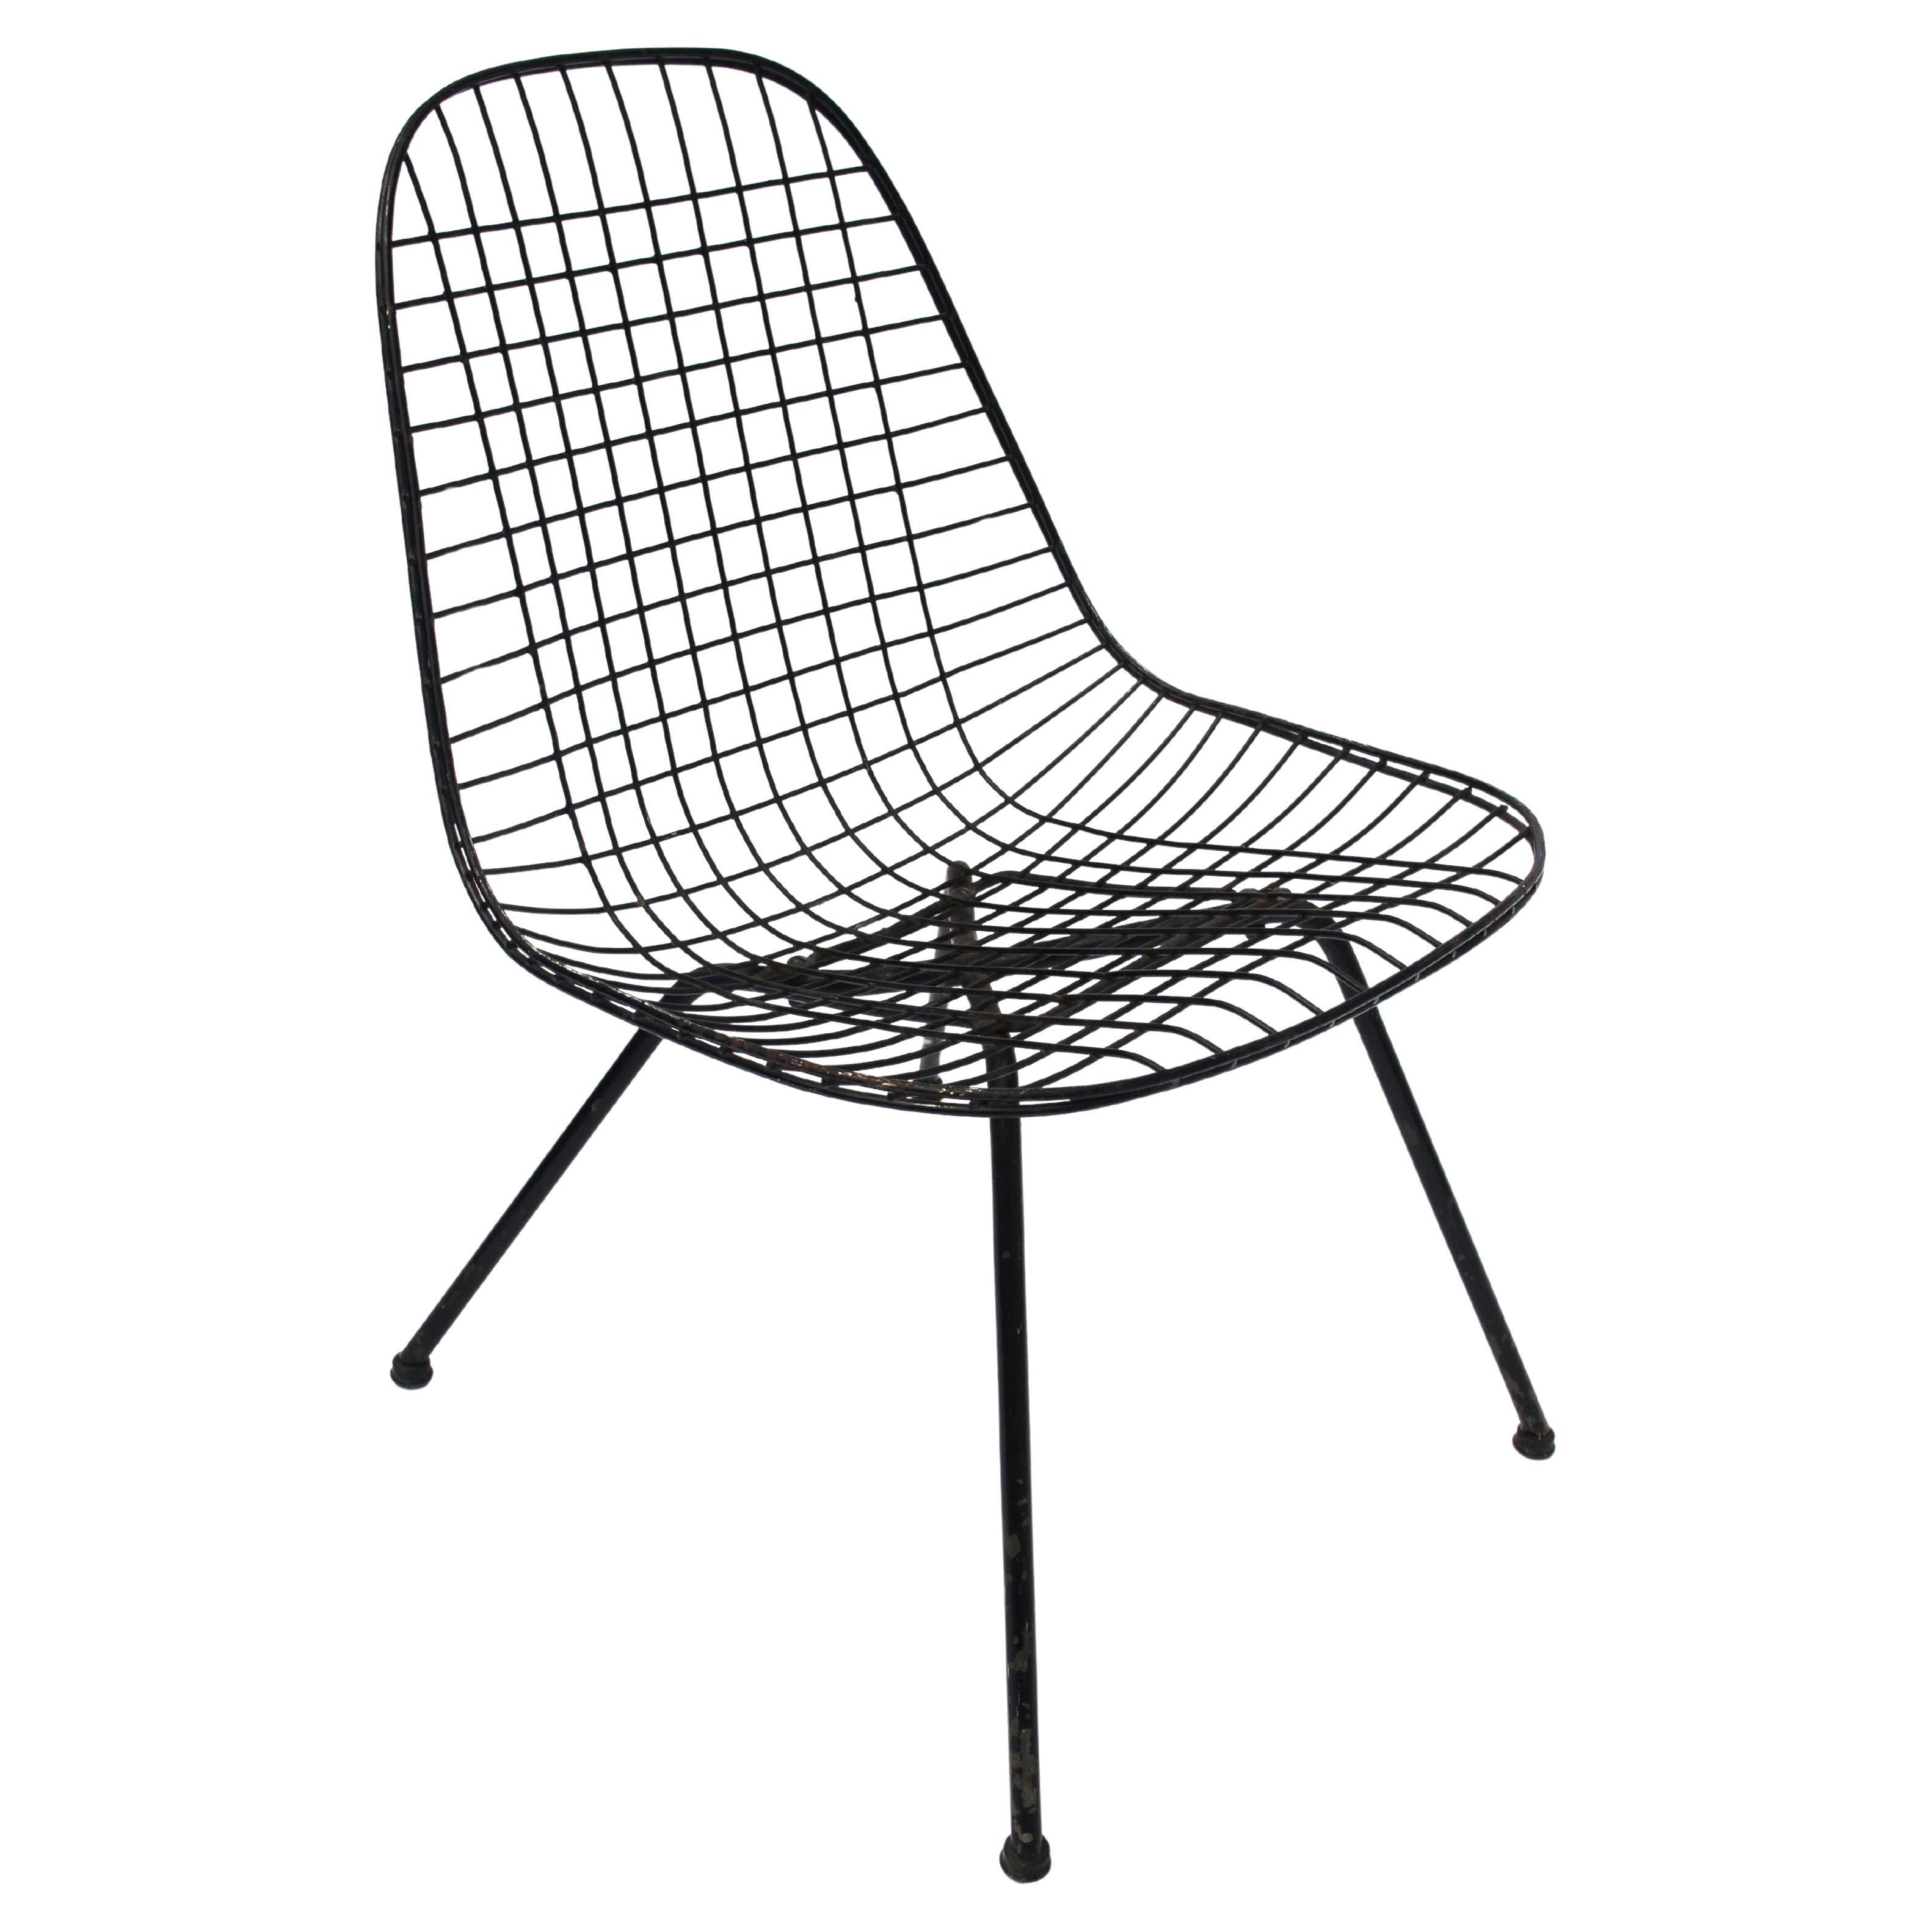 How long do Herman Miller chairs last?